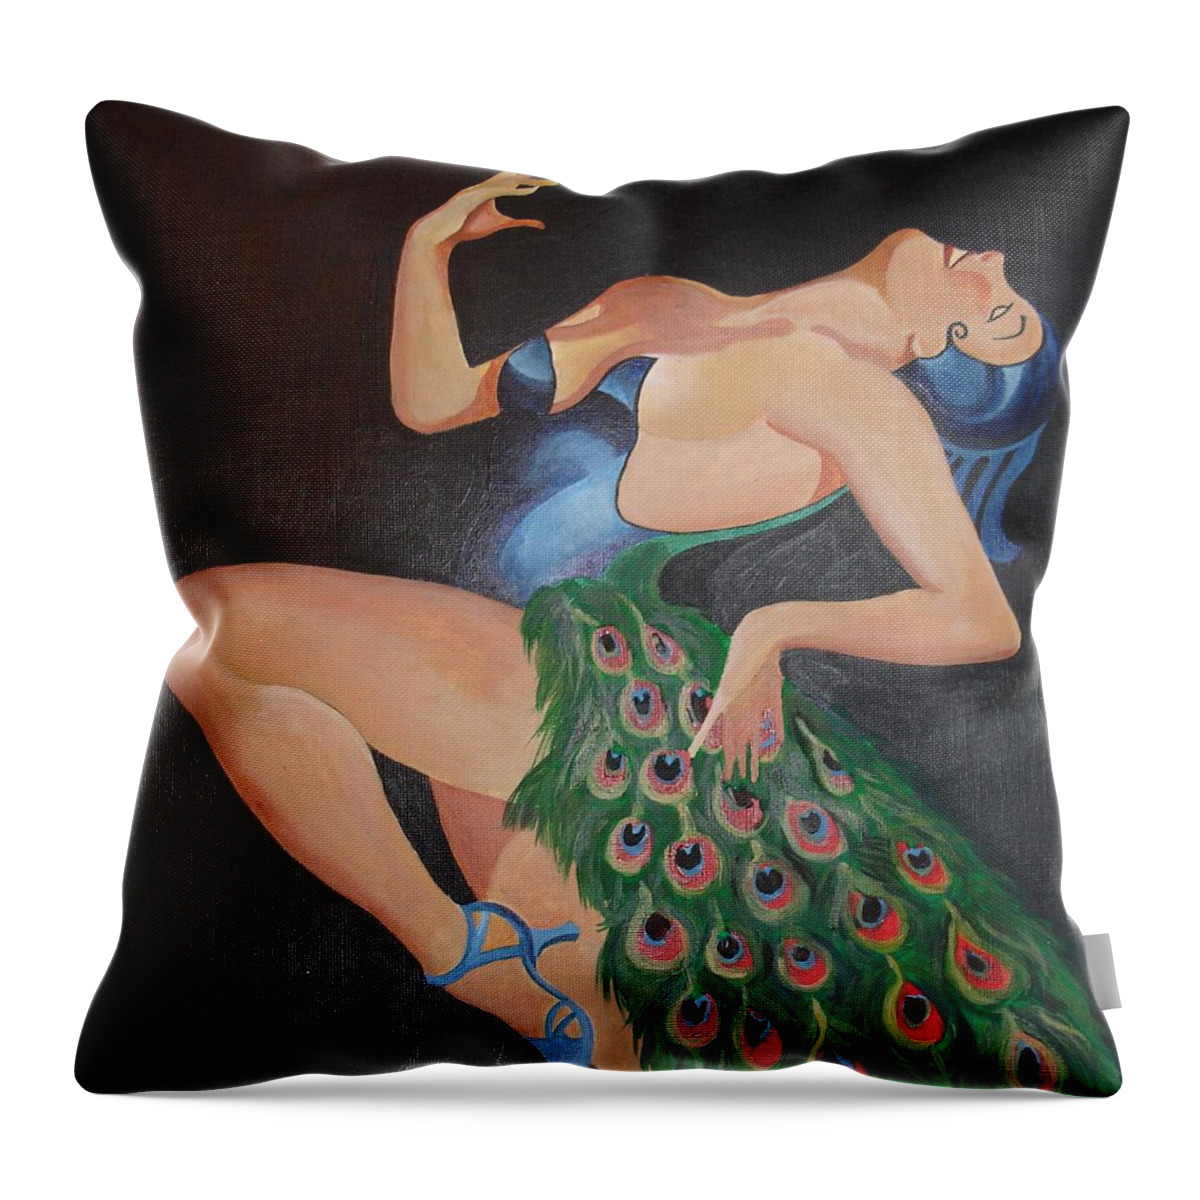 1930s Throw Pillow featuring the painting Pretending To Be A Peacock by Taiche Acrylic Art